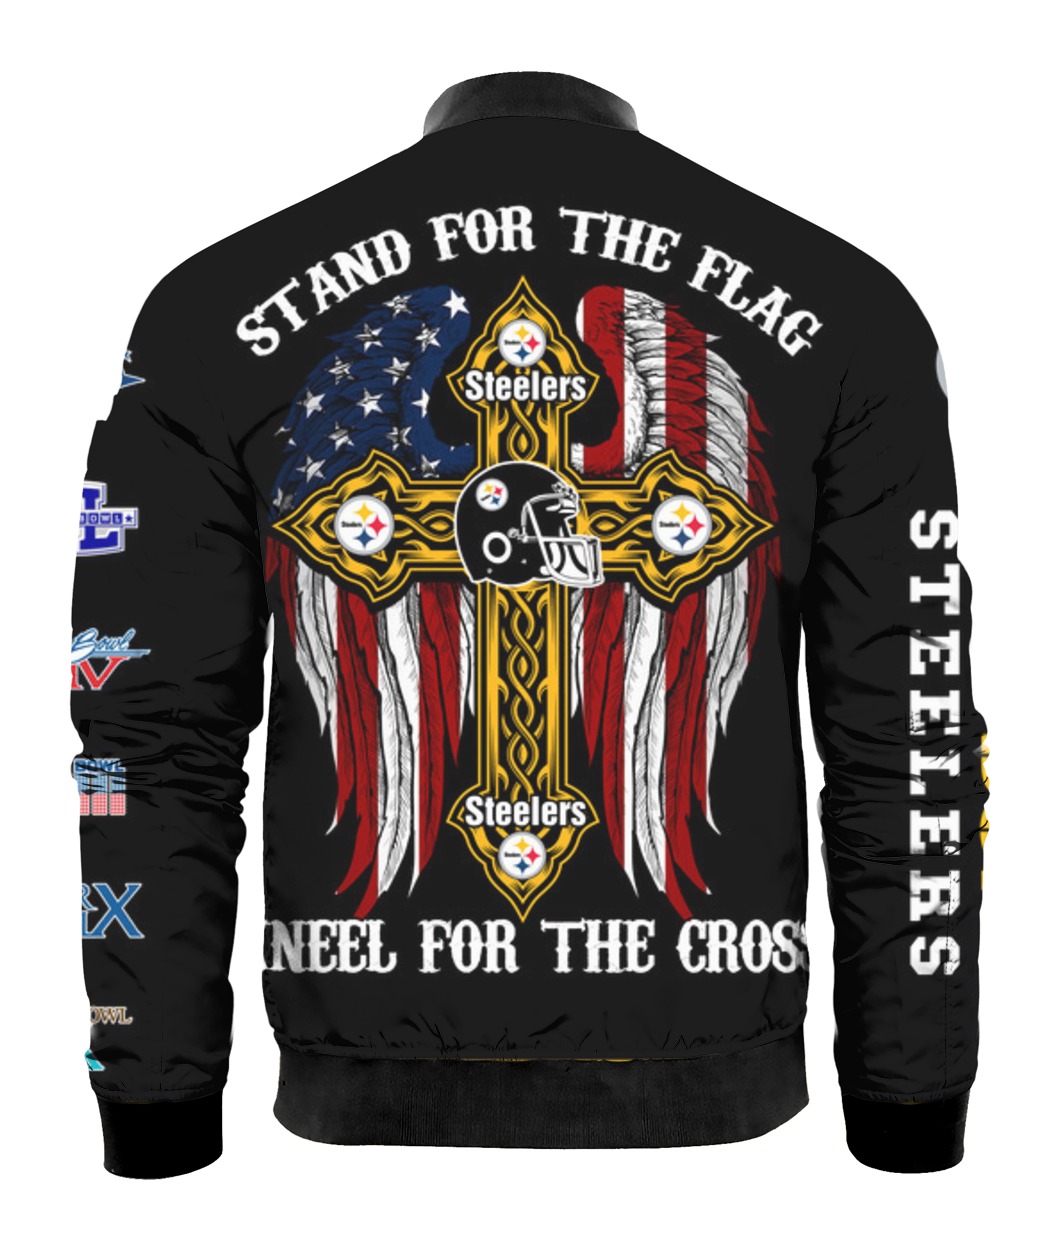 Stand for the flag kneel for the cross pittsburgh steelers all over print bomber - back